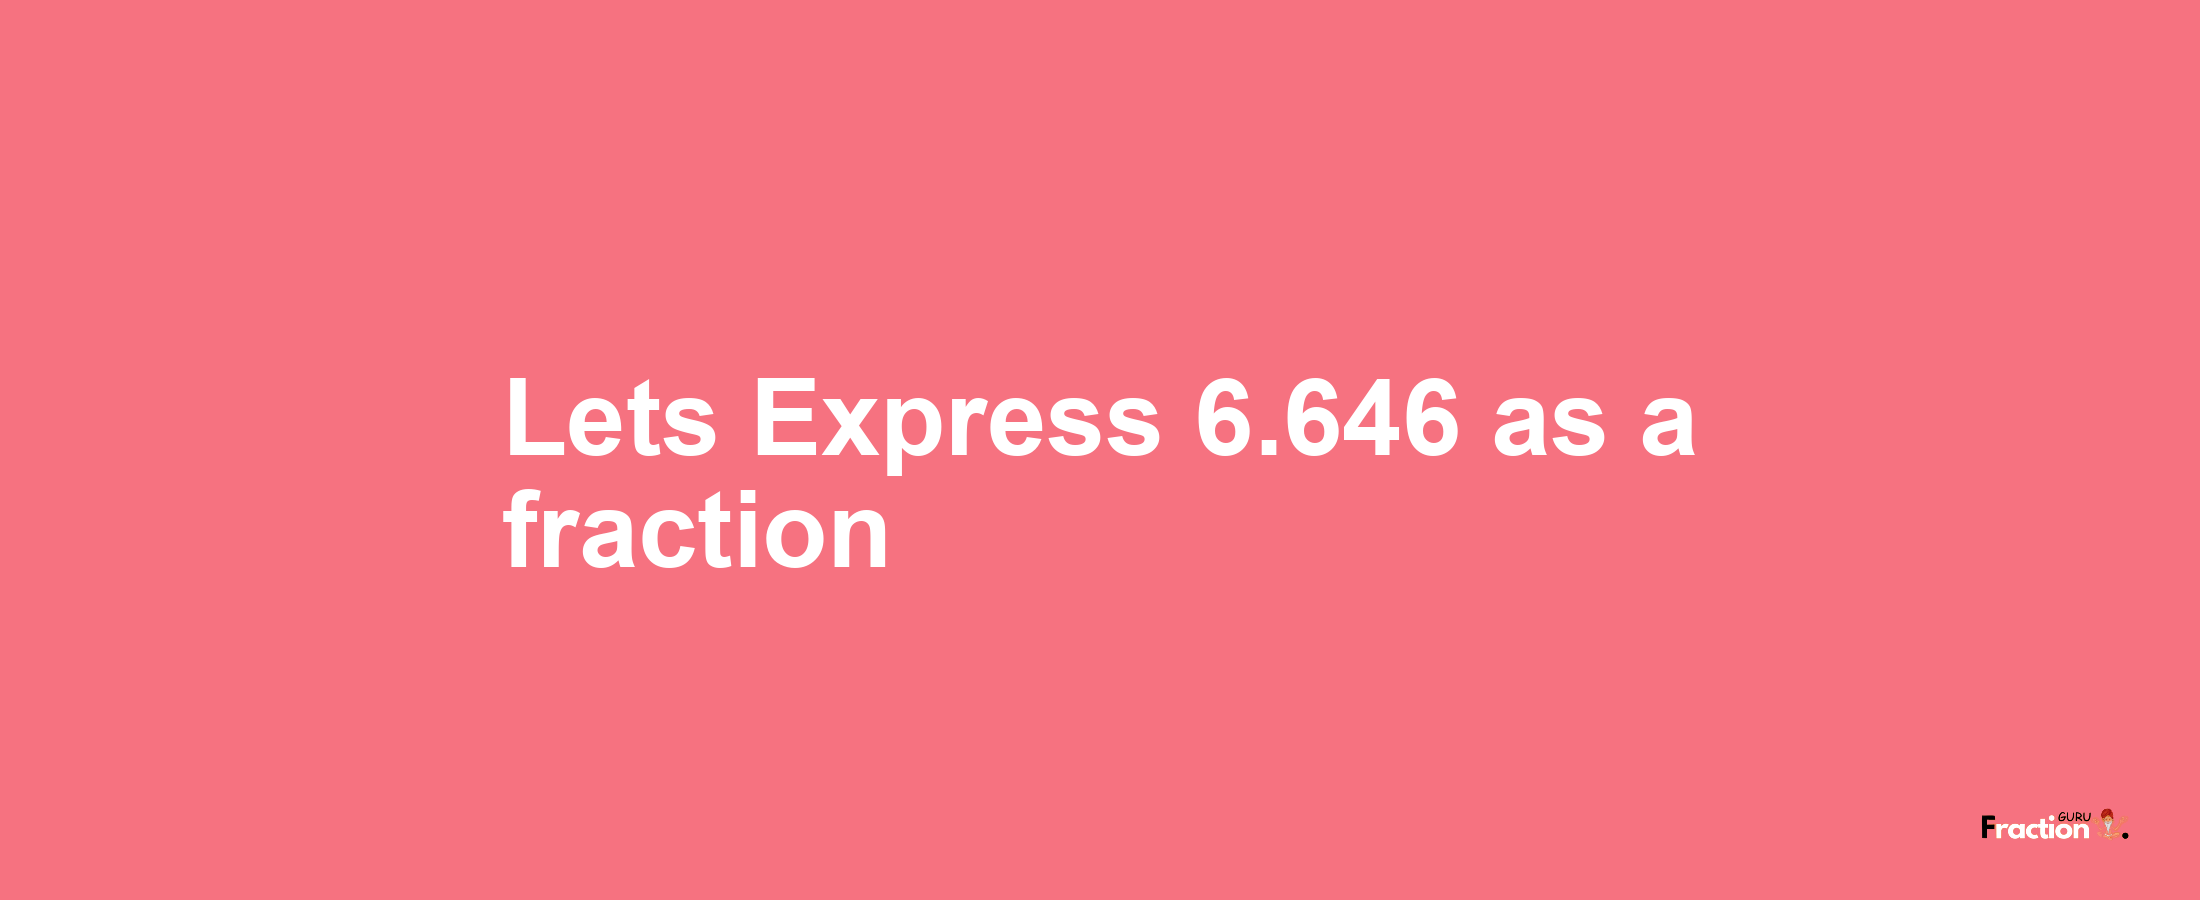 Lets Express 6.646 as afraction